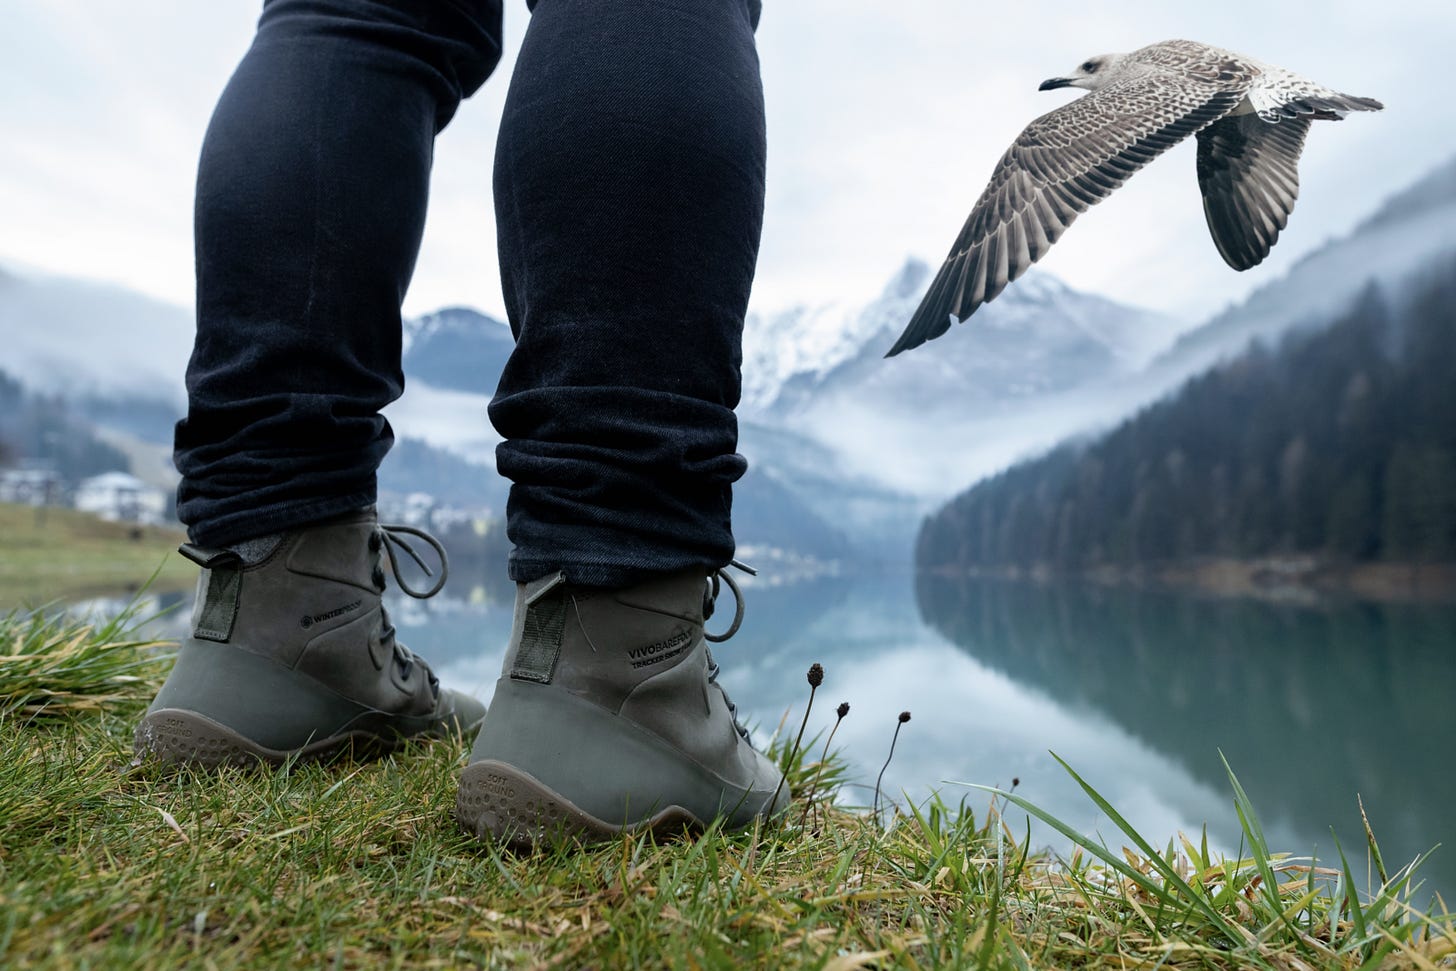 A pair of denim clad legs in hiking boots stand on green grass before a river, and snow capped mountains in the distance. A bird is flying toward the mountains.